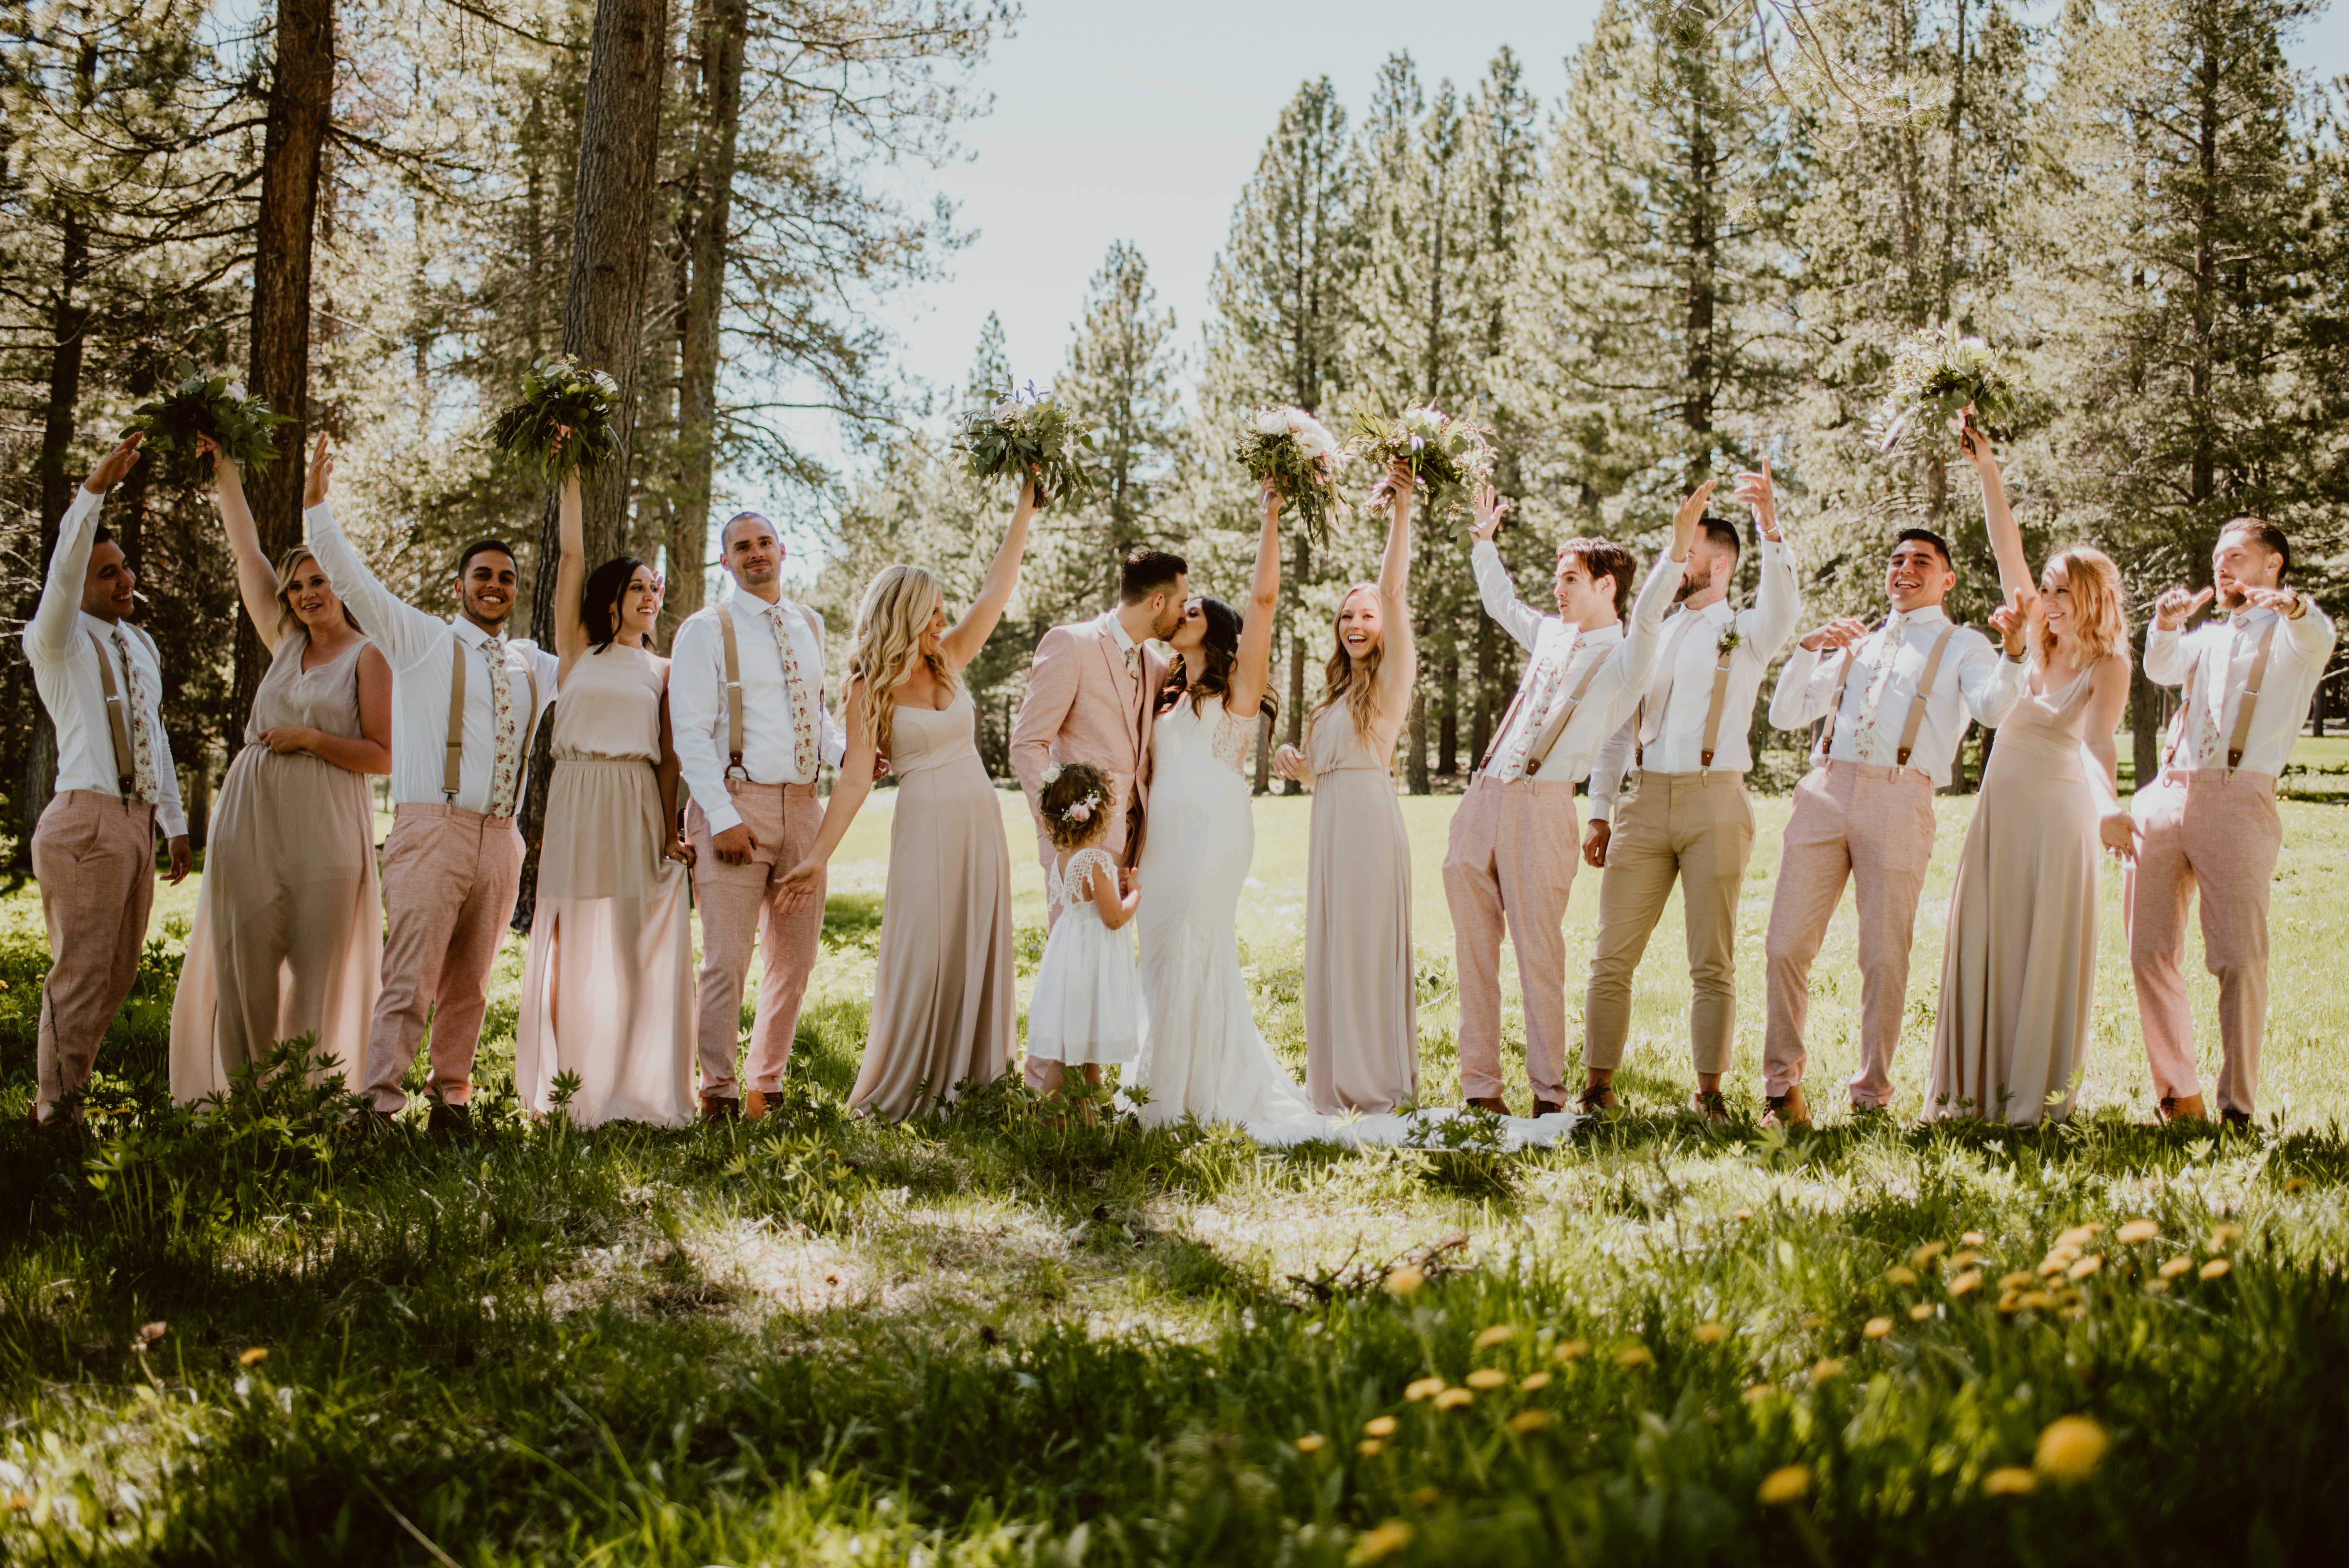 A bride and groom kiss, while their wedding party stands on both sides of them cheering. They're standing in a meadow in the forest.